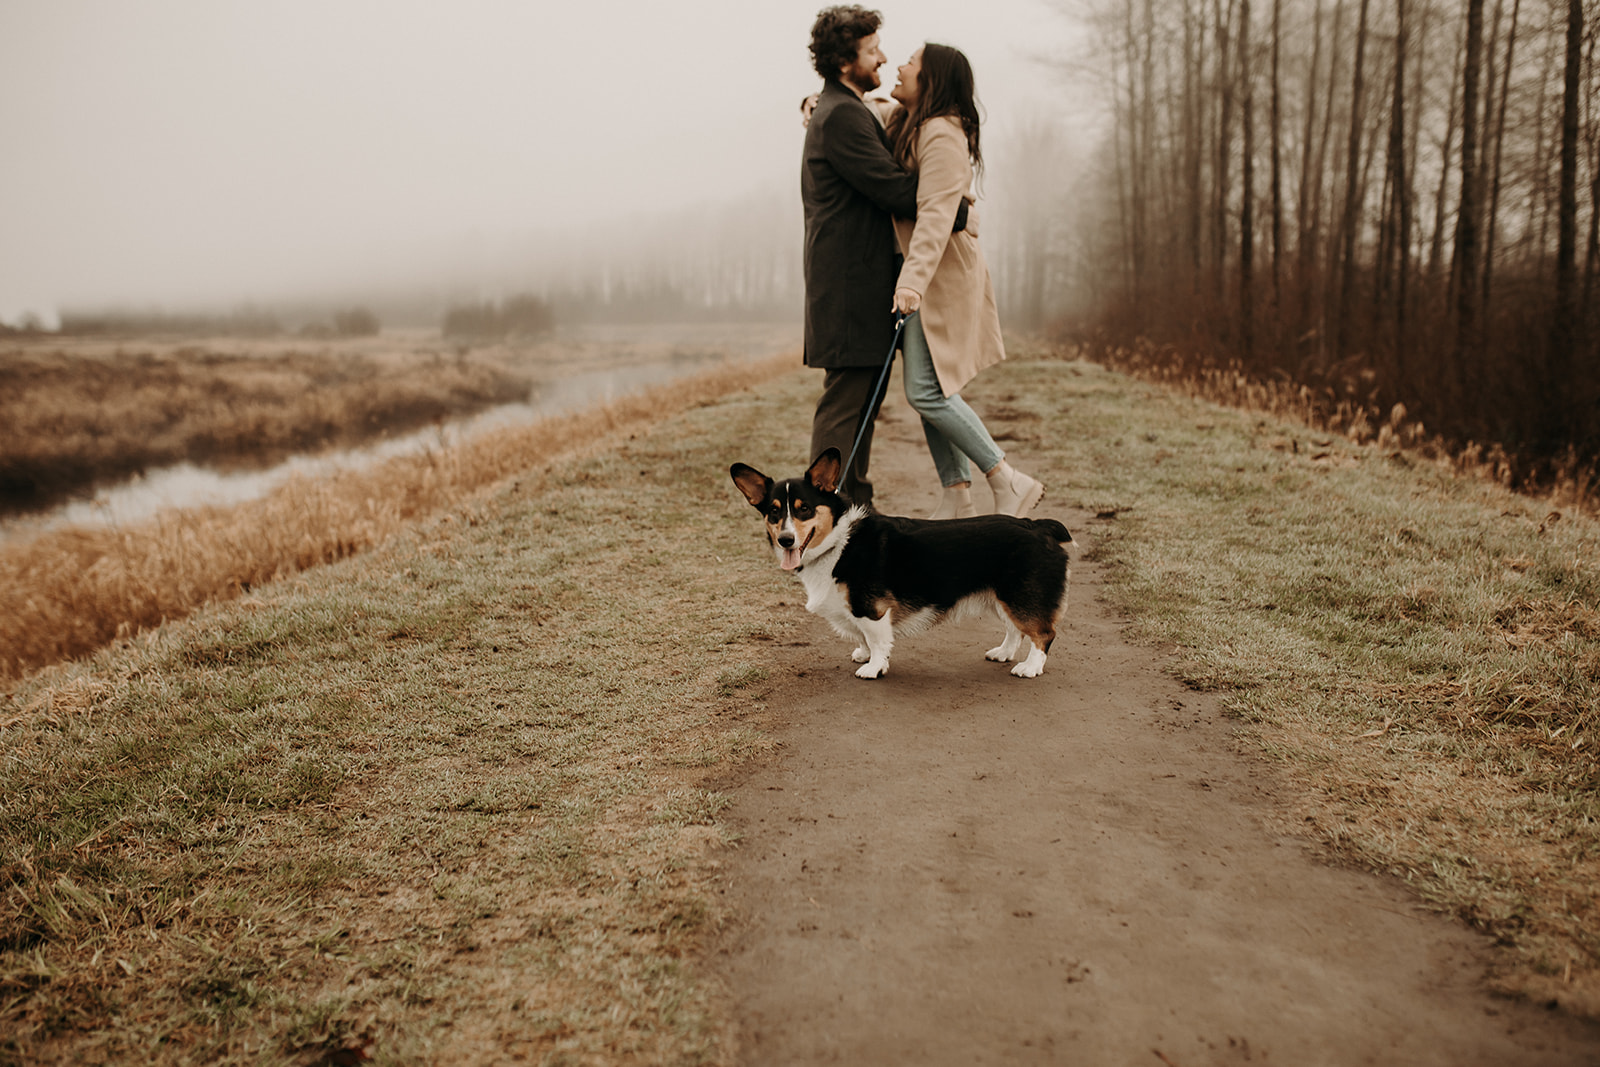 A couple having their engagement photos photographed by Pitt Lake in Pitt Meadows, BC